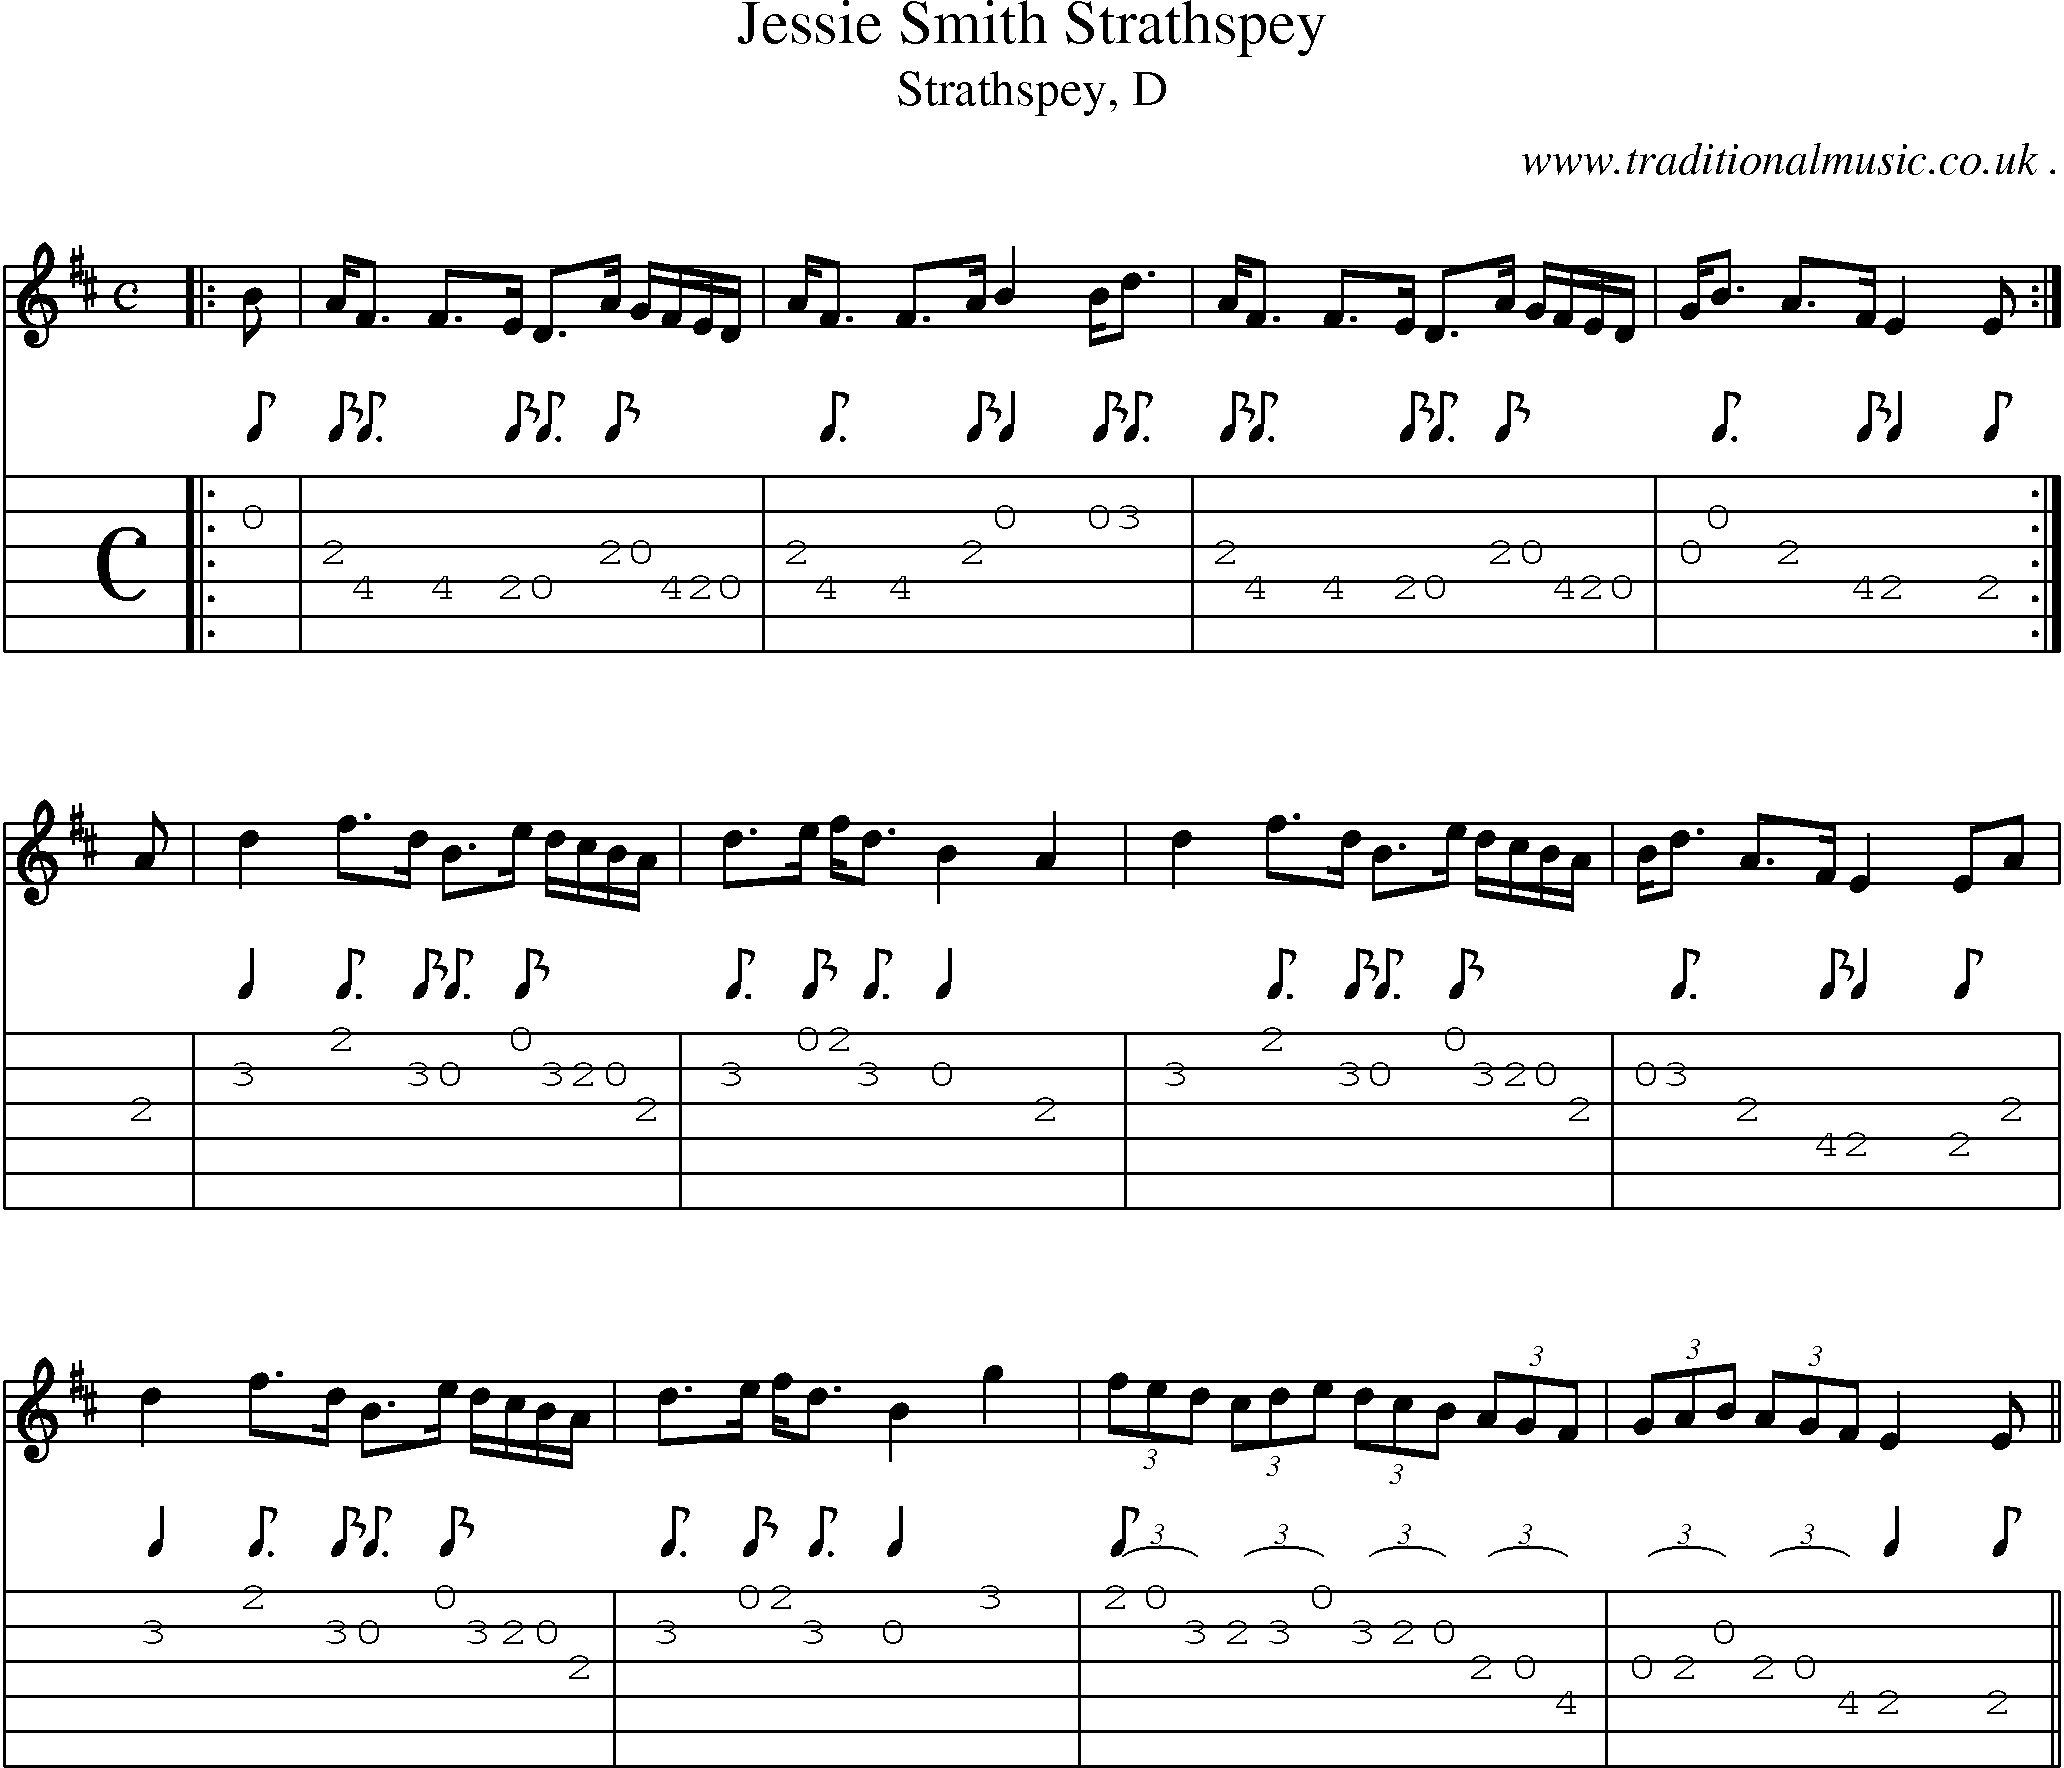 Sheet-music  score, Chords and Guitar Tabs for Jessie Smith Strathspey